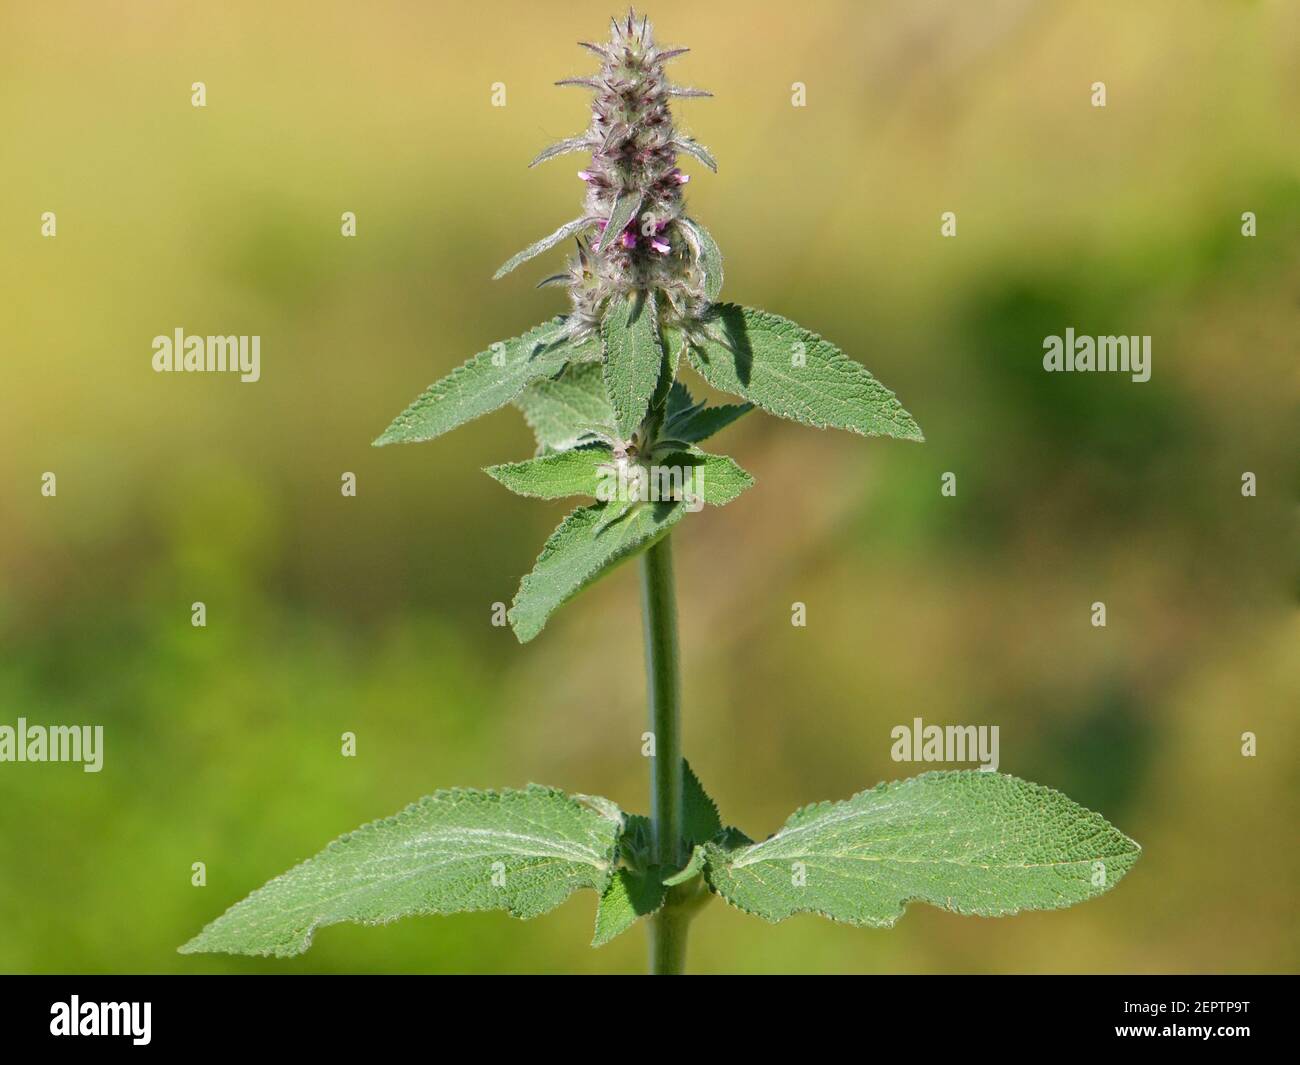 Downy woundwort blooming plant, Stachys germanica Stock Photo